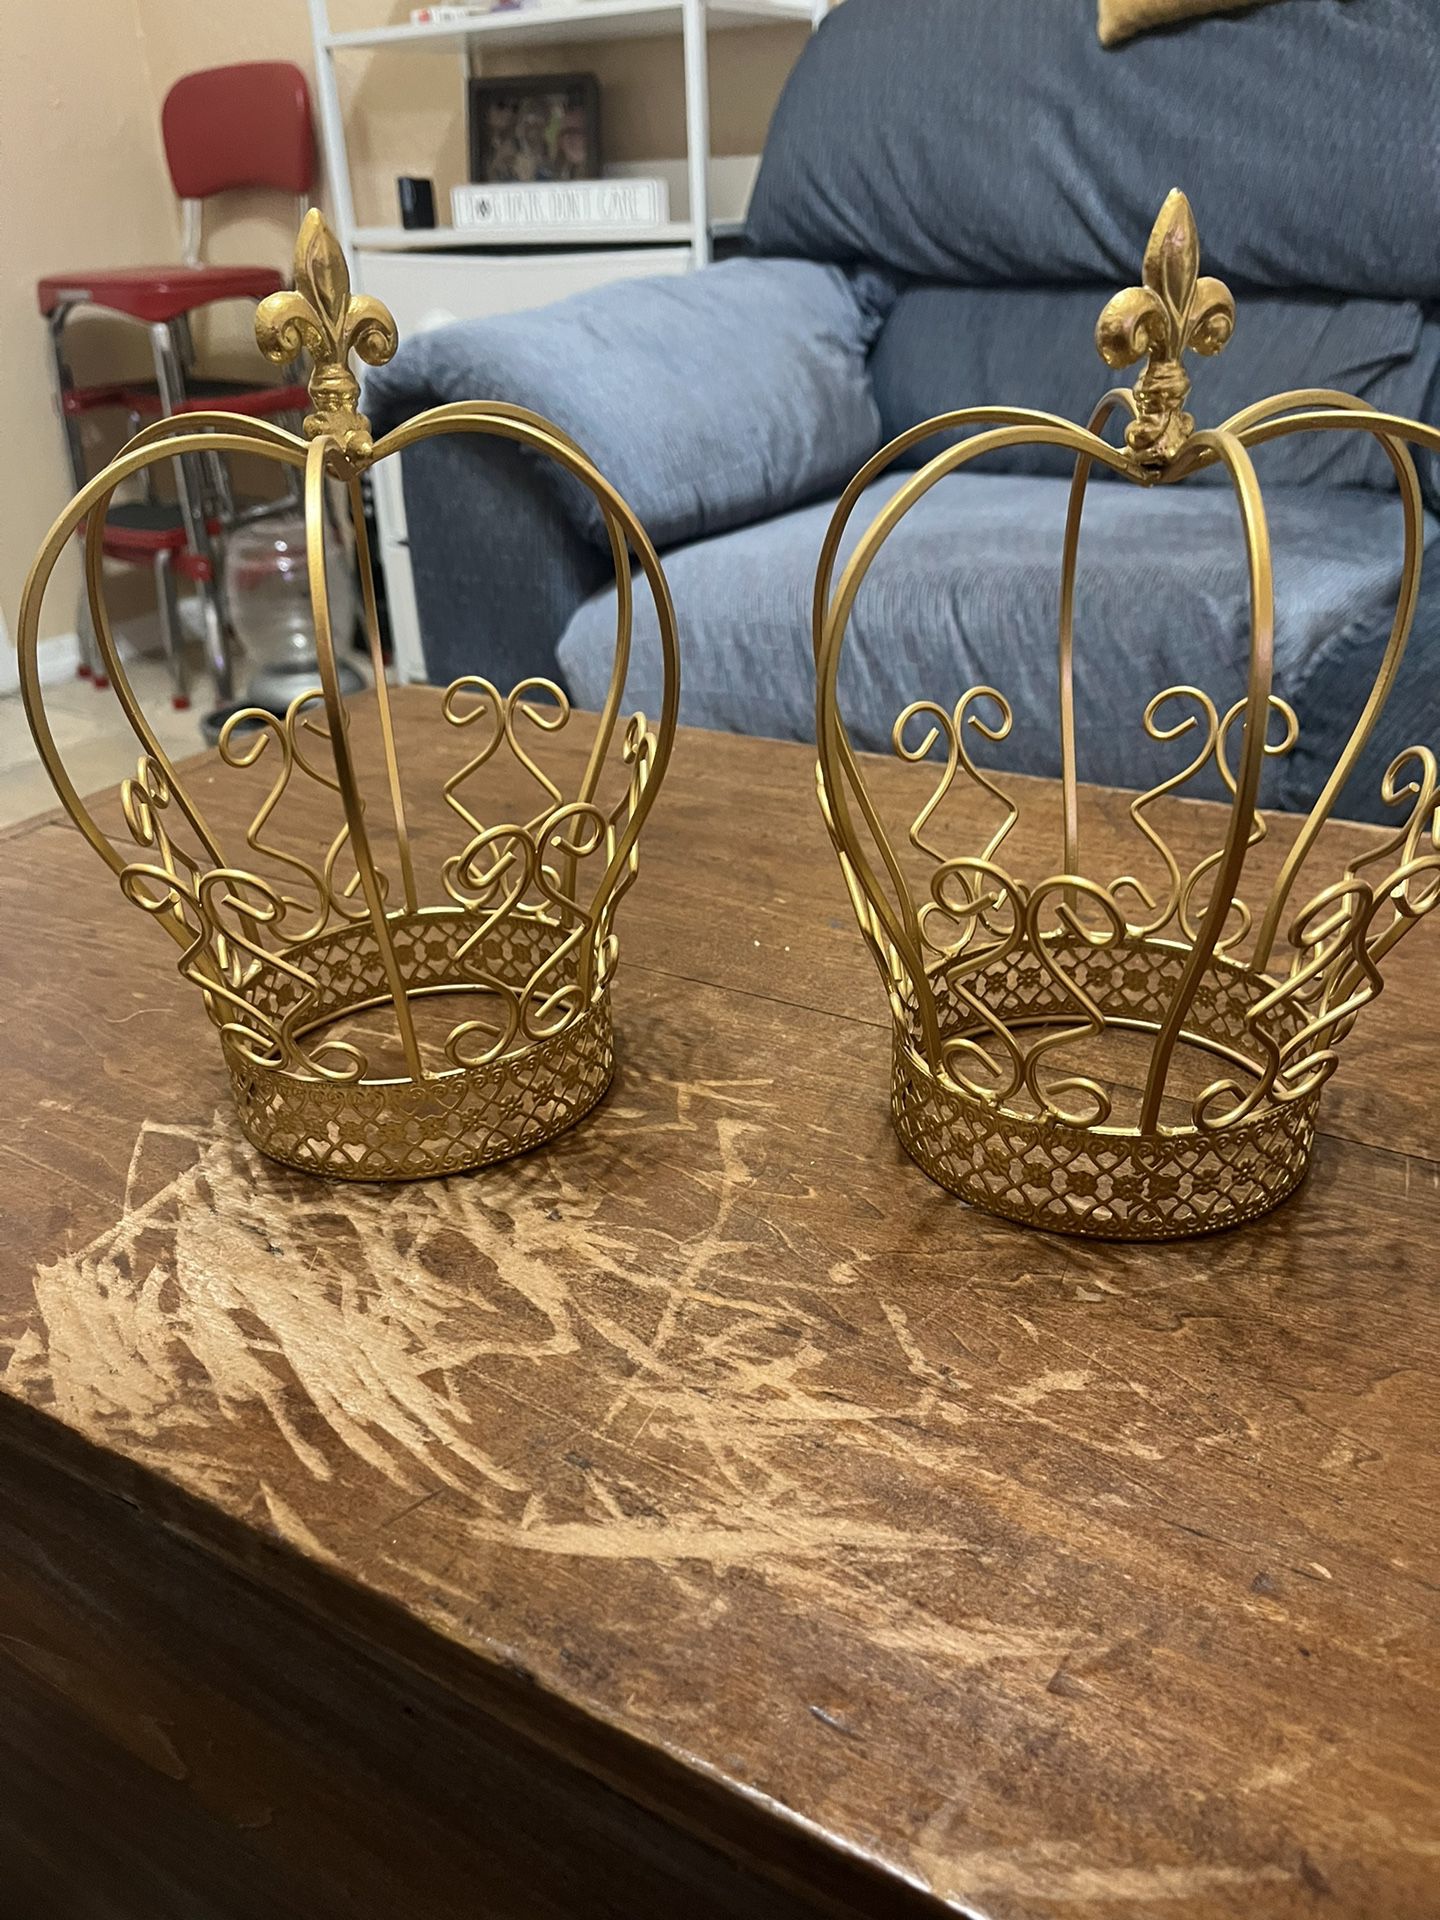 TWO Gold Crown Decor